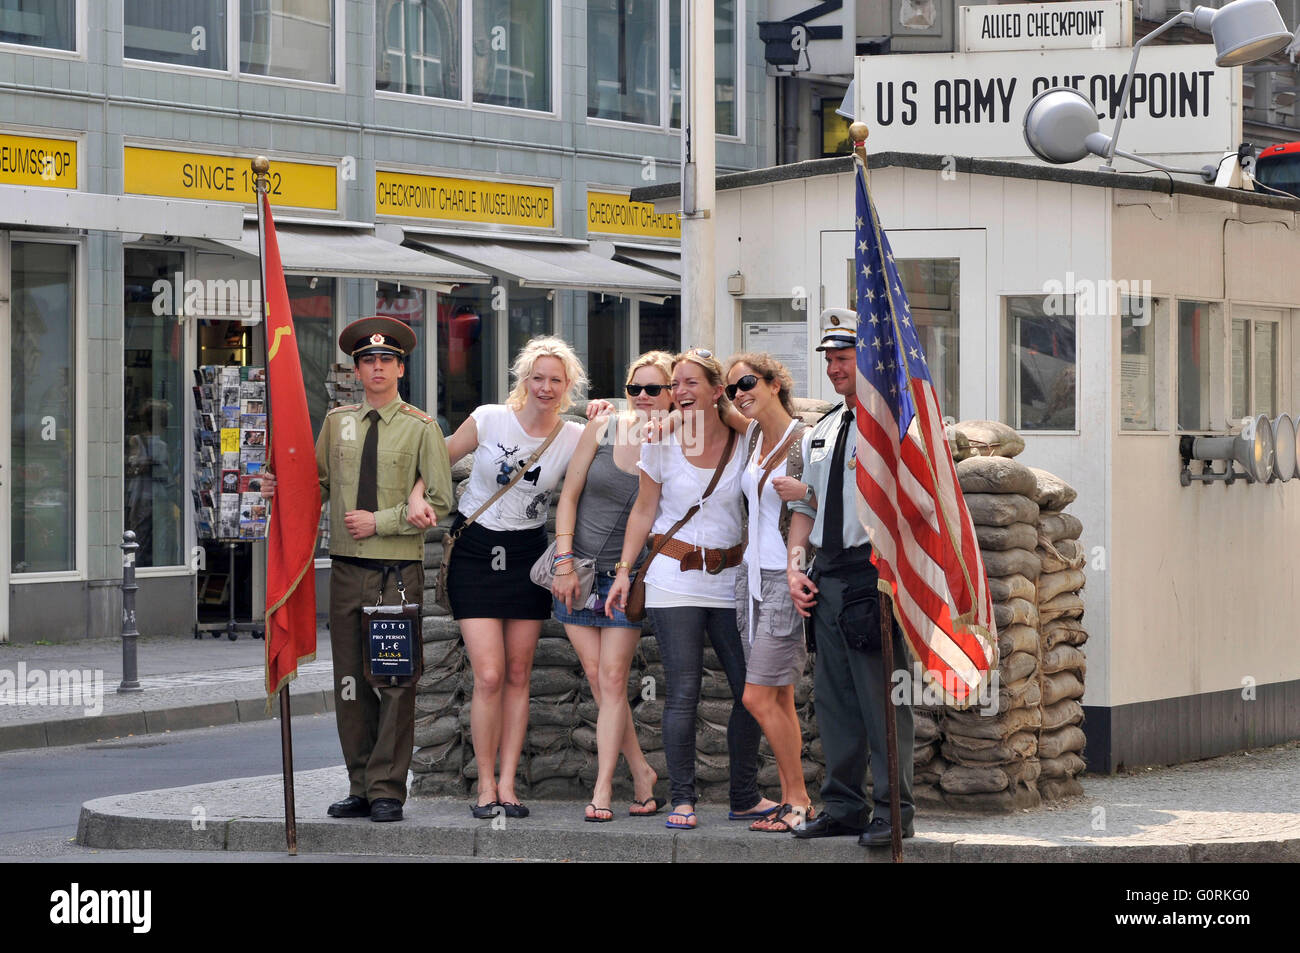 Tourists, actors, soldiers, posing, photo, souvenir, Checkpoint Charlie, Friedrichstrasse, Mitte, Berlin, Germany Stock Photo